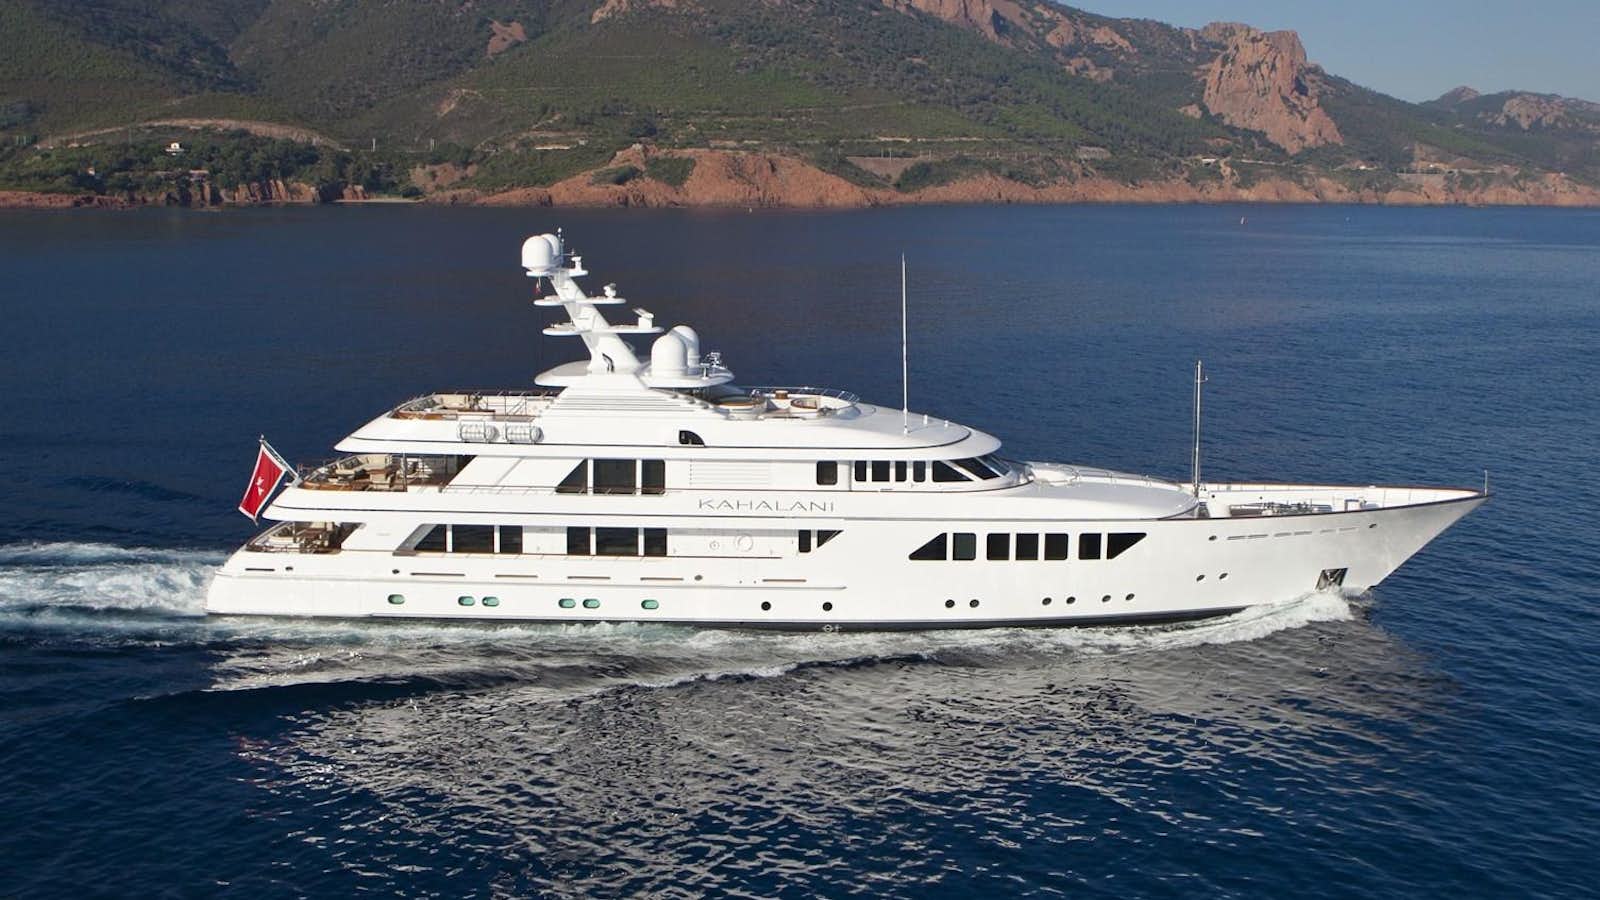 a boat on the water aboard KAHALANI Yacht for Sale